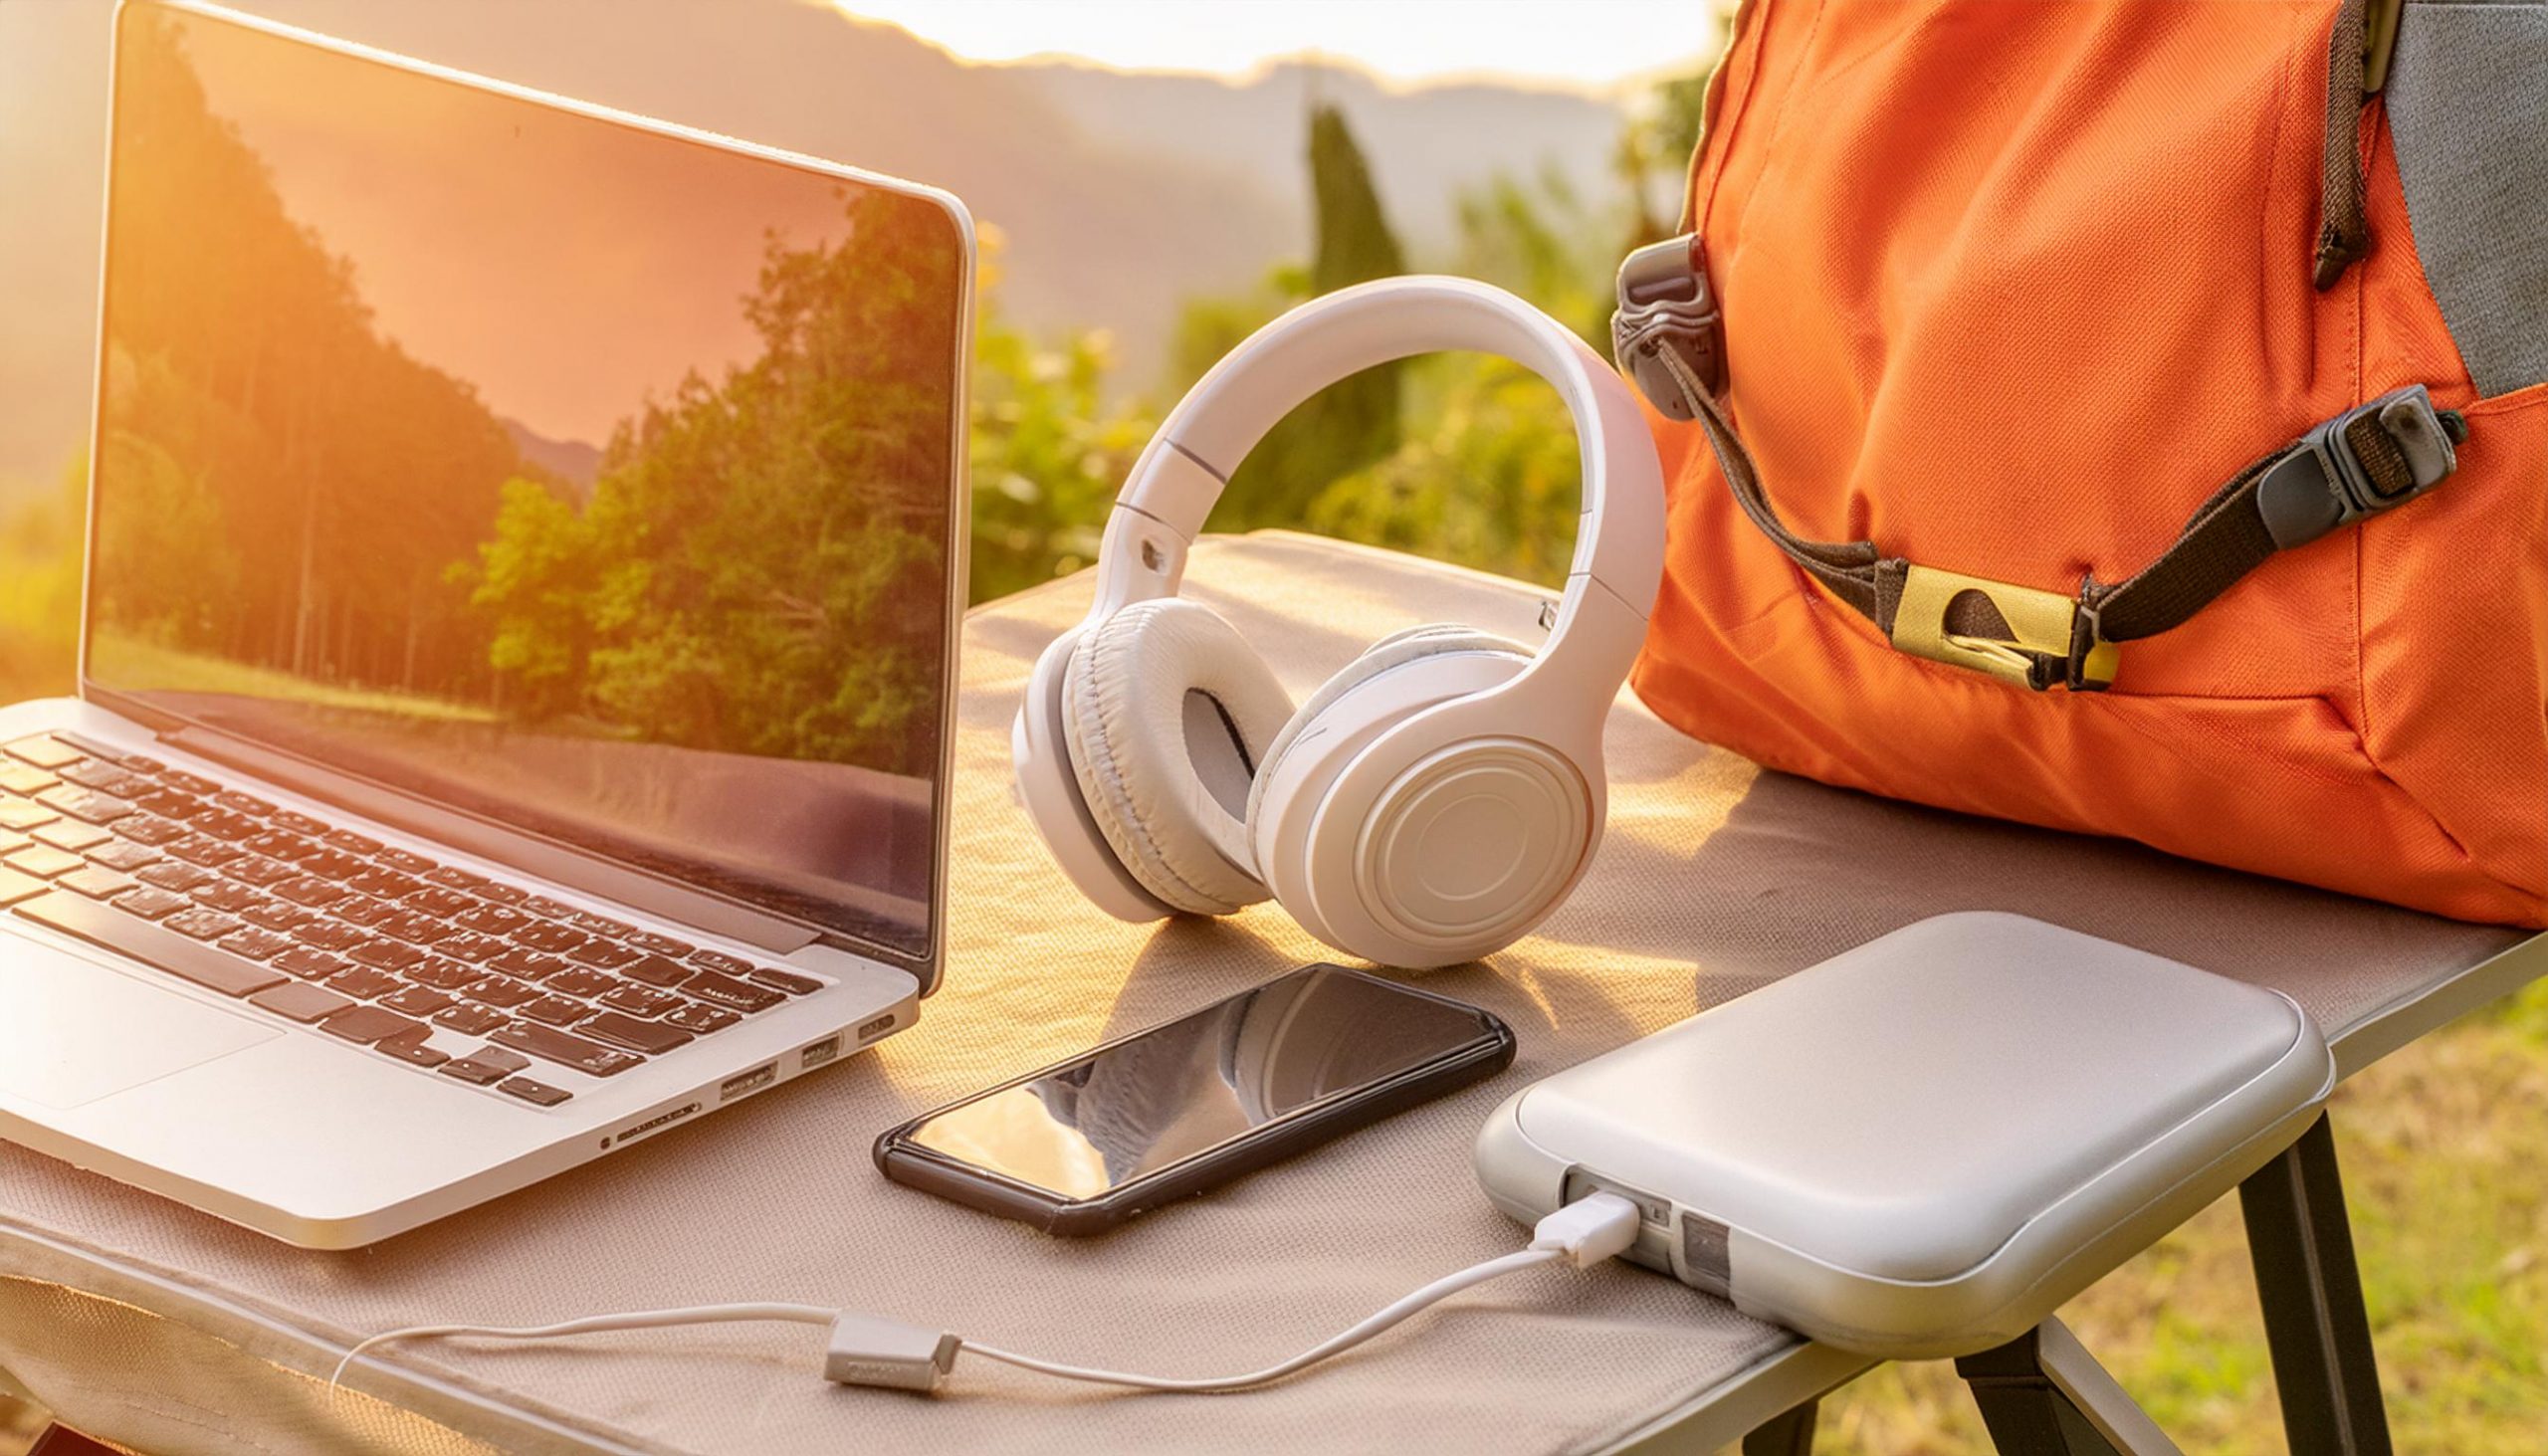 Illustration showcasing essential items for digital nomads, including a laptop, power bank, wireless headphones, travel backpack, and compact standing desk.